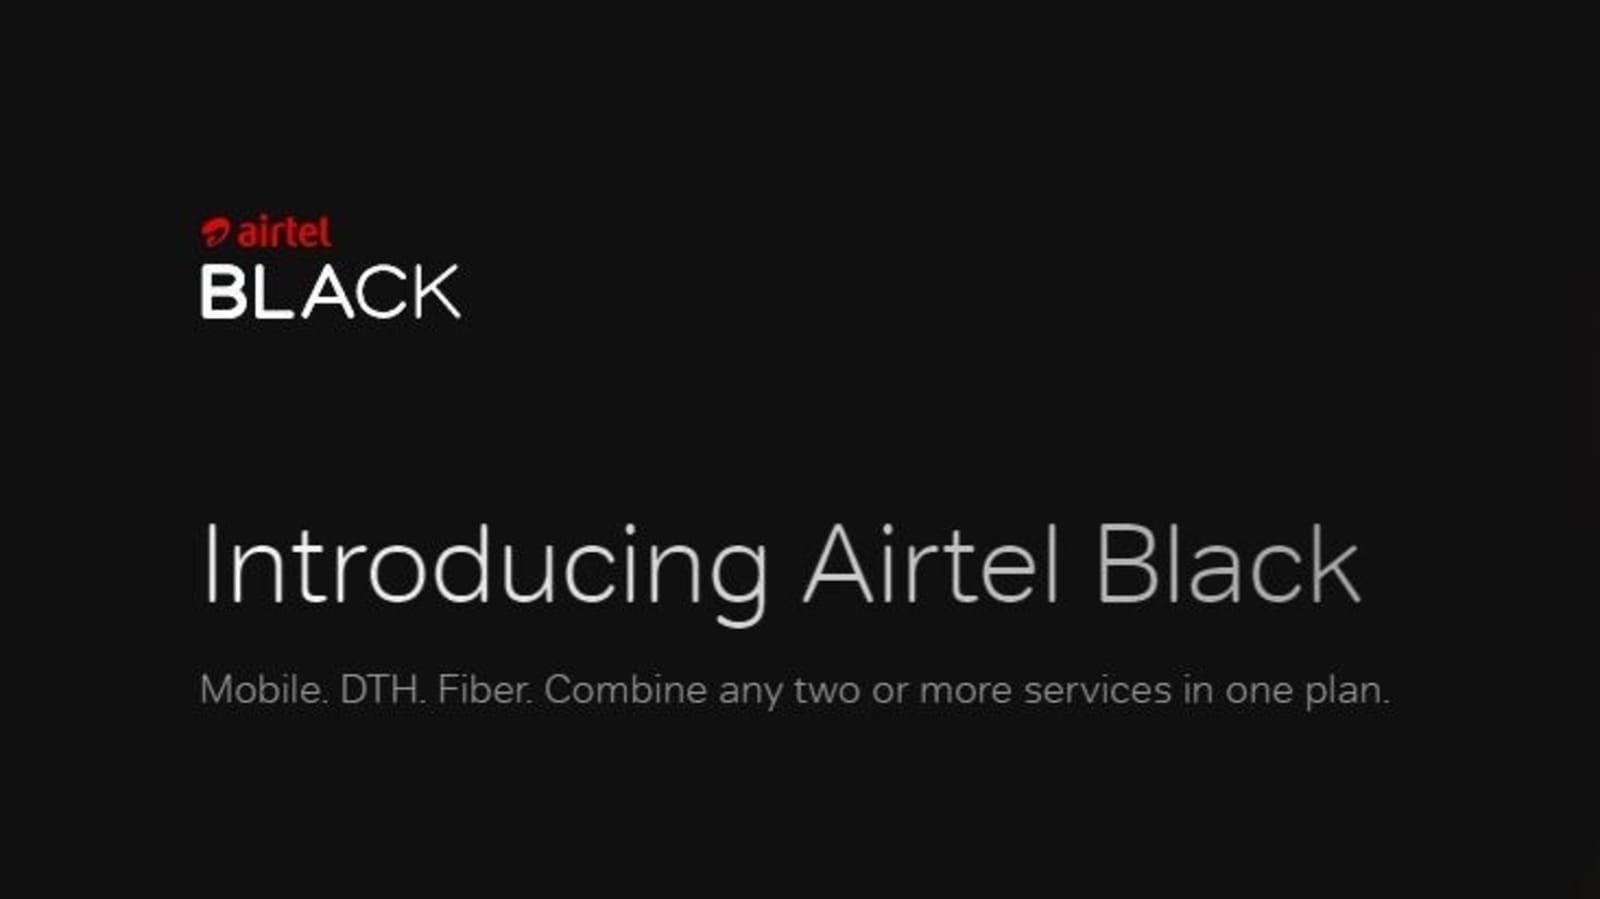 airtel-black-free-broadband-and-dth-services-available-through-airtel